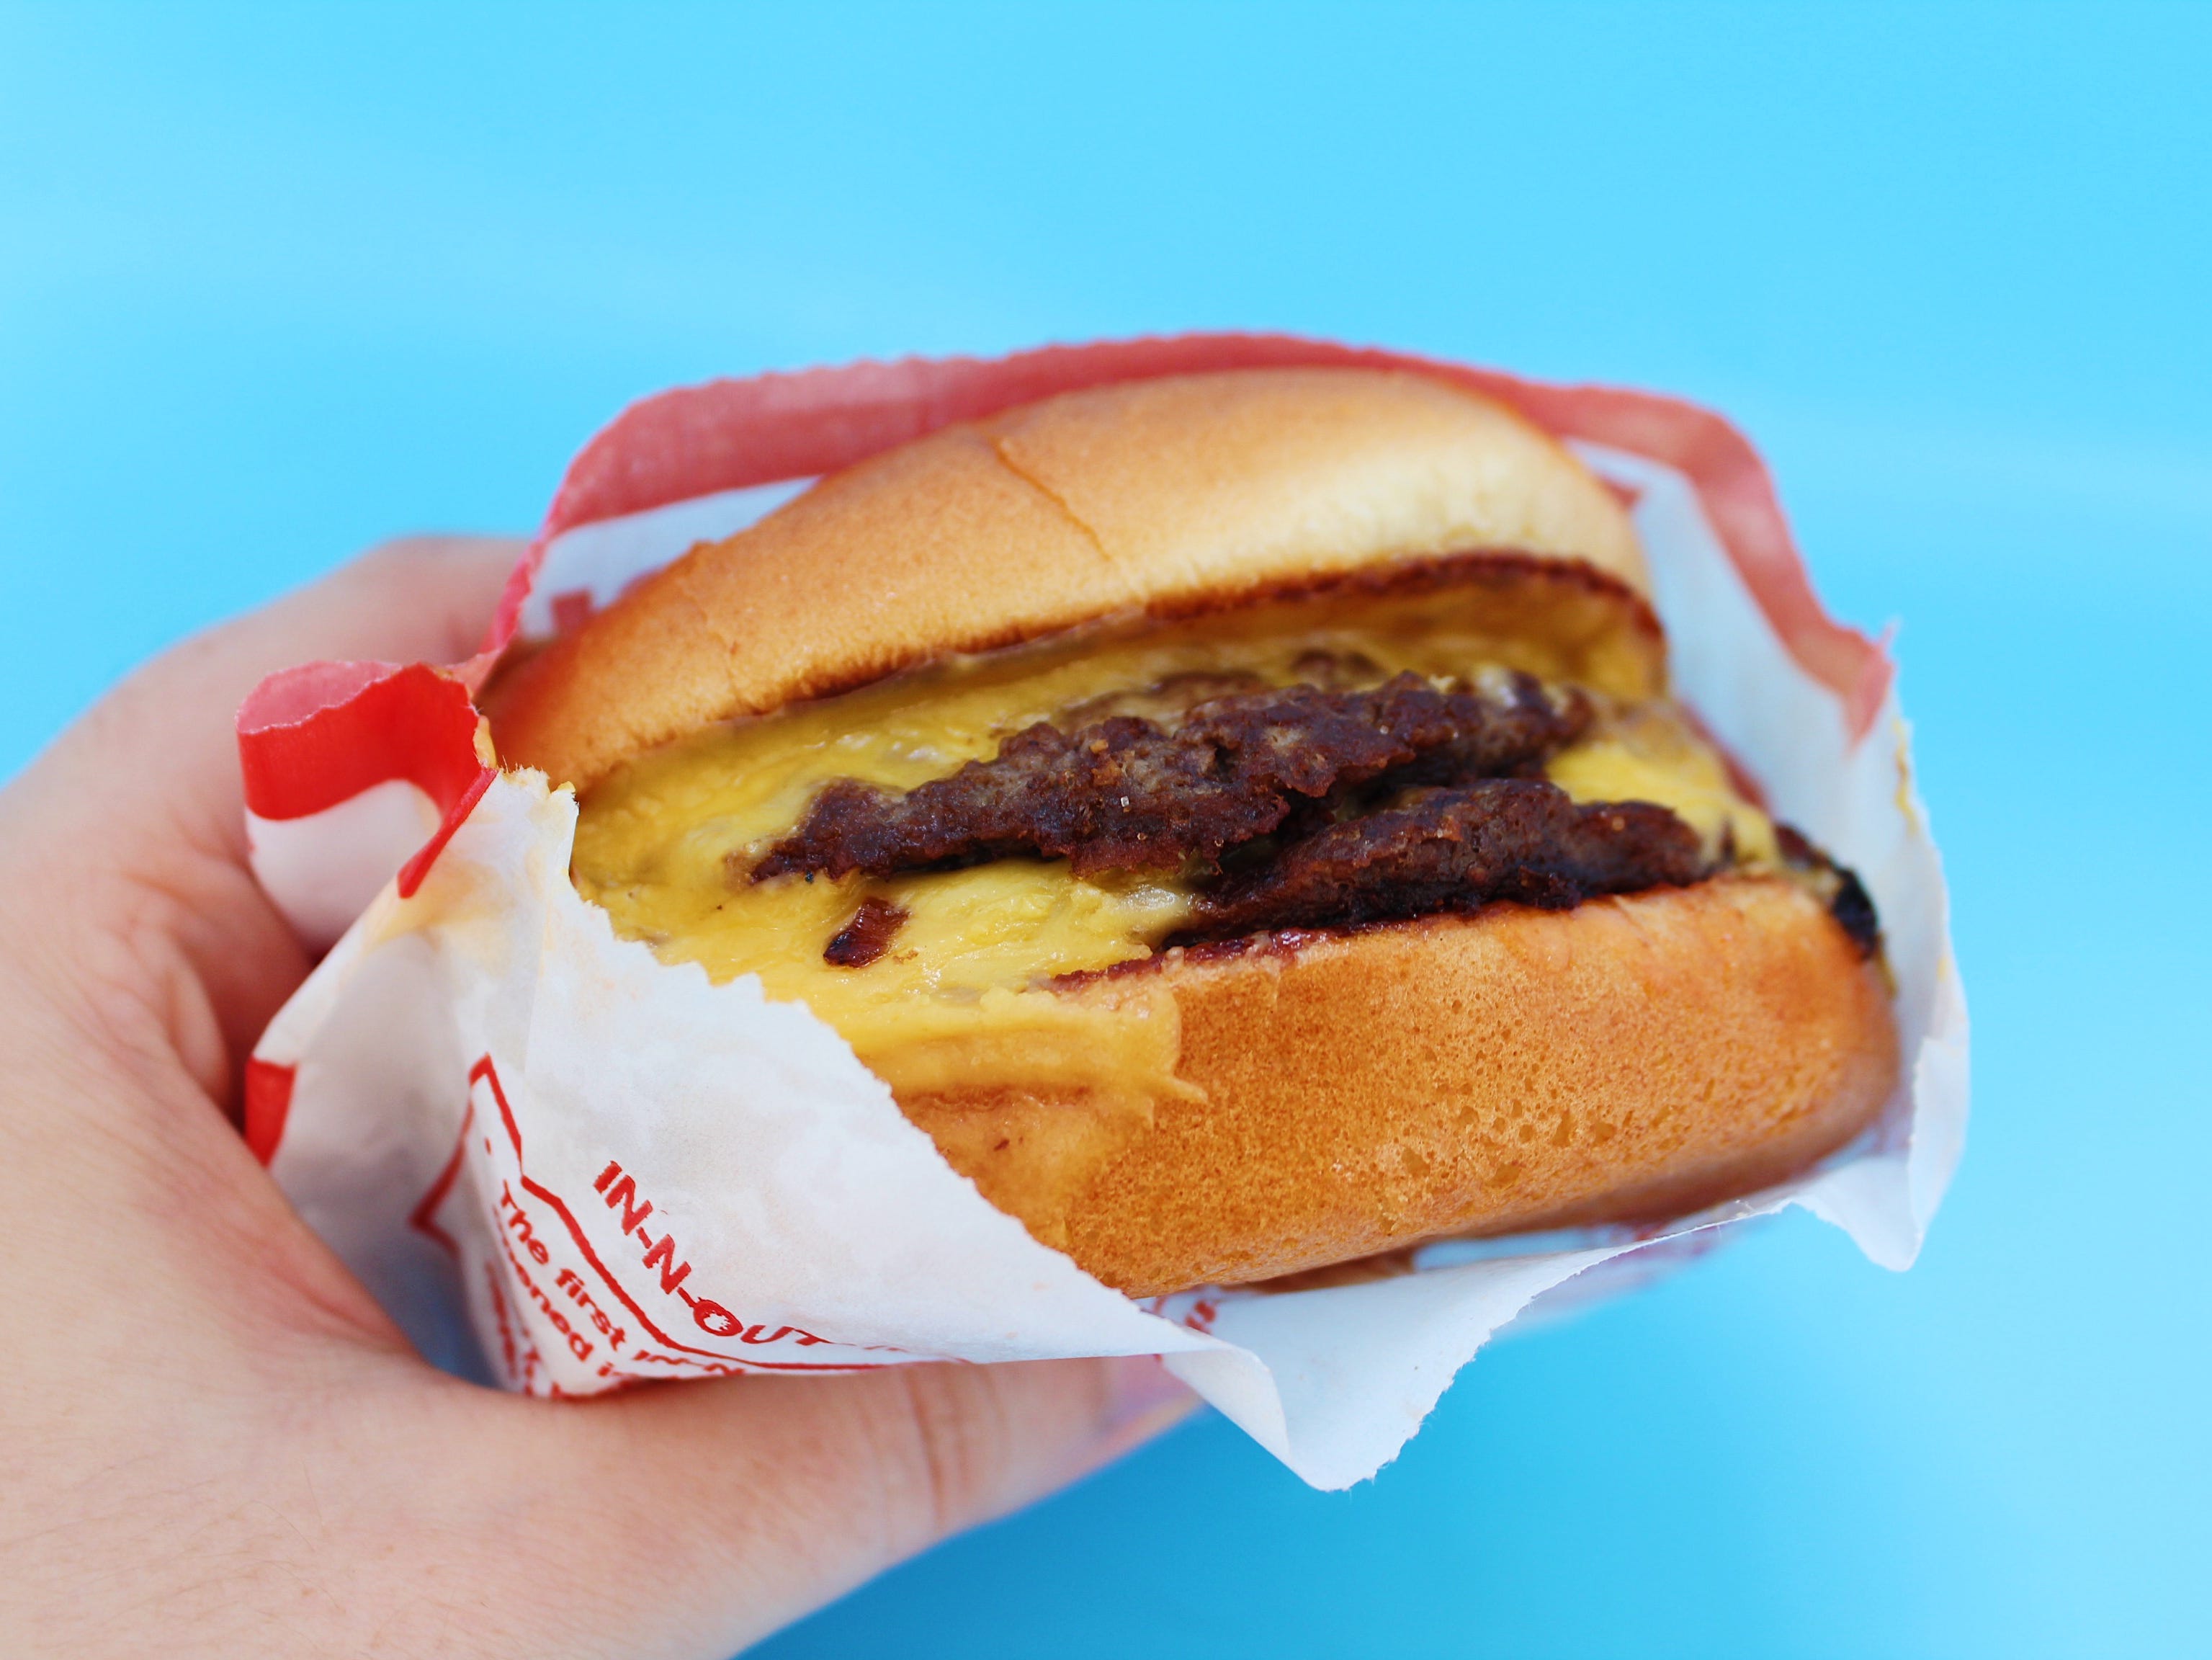 Doppel-Cheeseburger „In n Out“